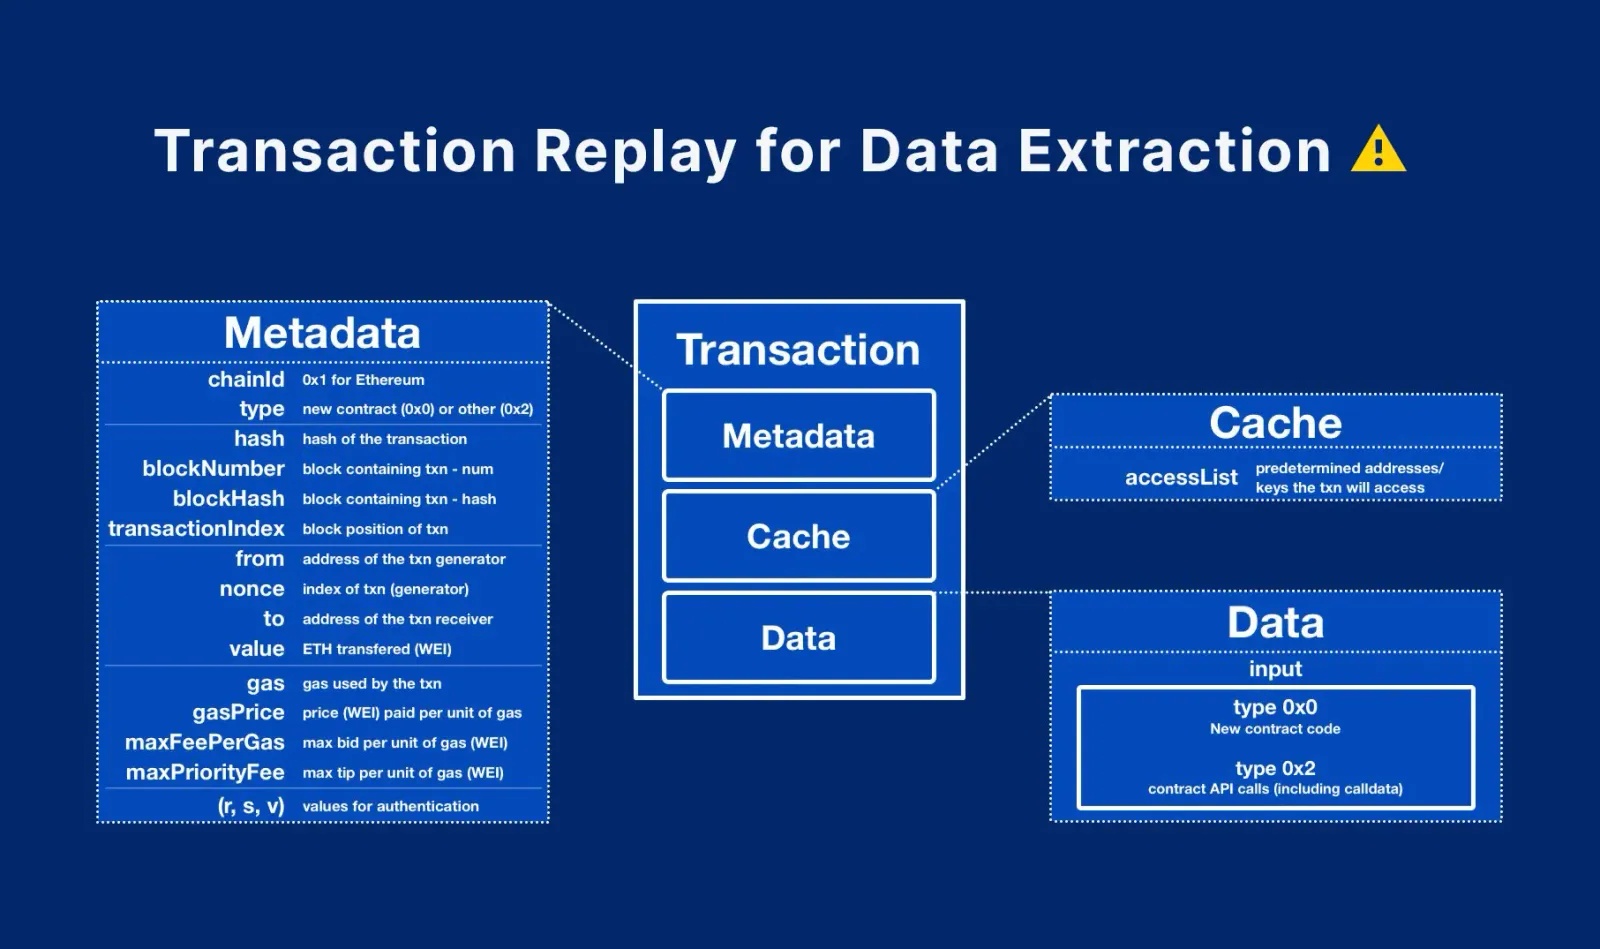 Why Transaction Replay Is Not Enough to Extract the Storage?